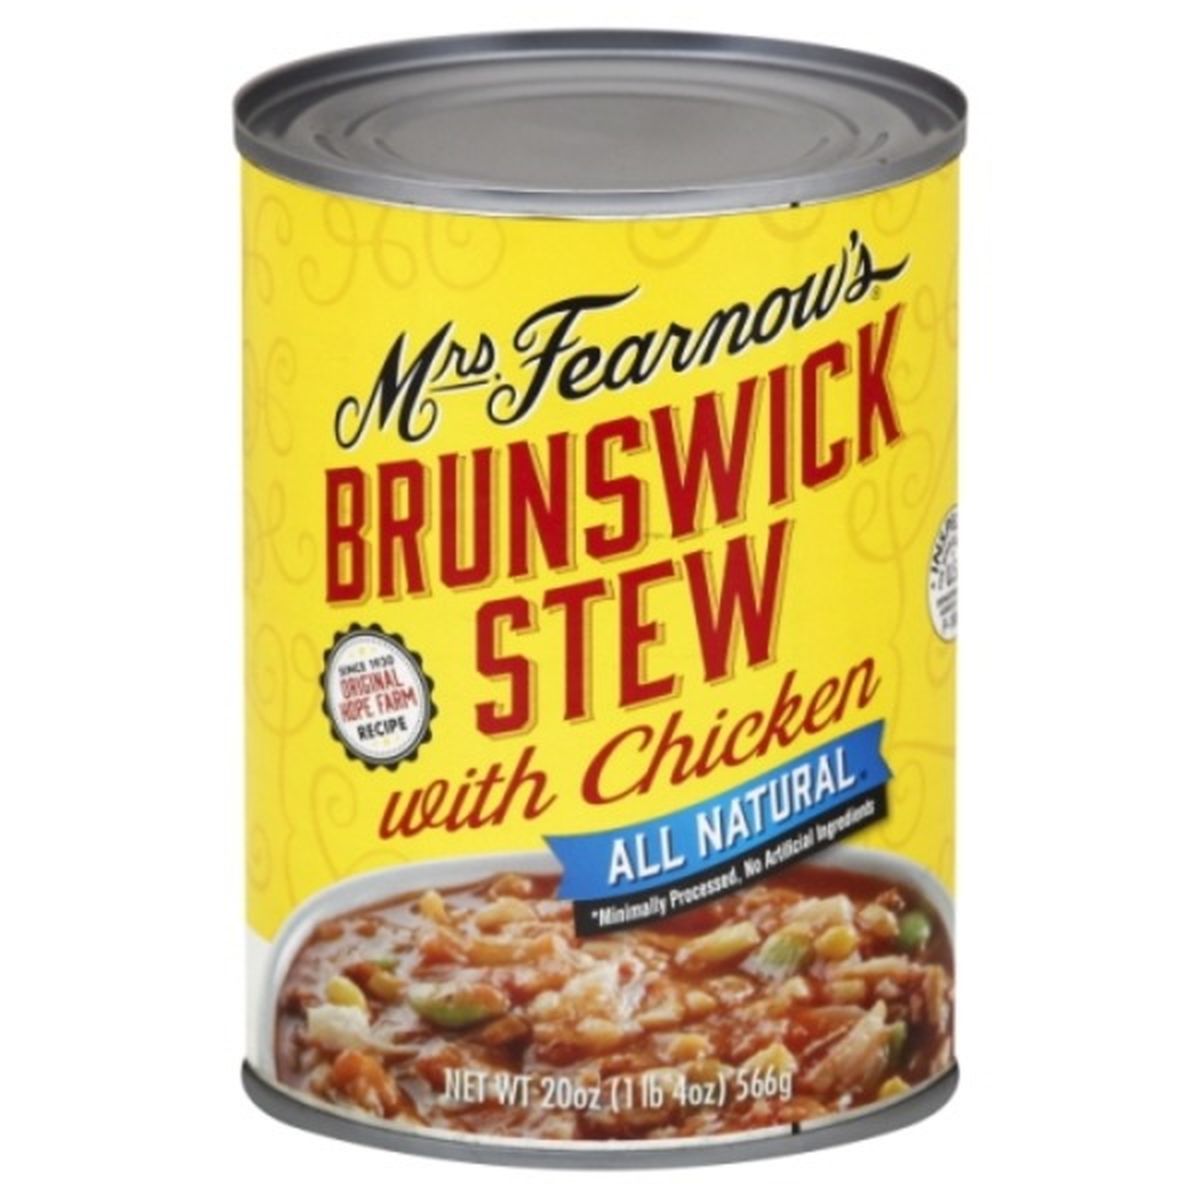 Calories in Mrs. Fearnow's Brunswick Stew, with Chicken